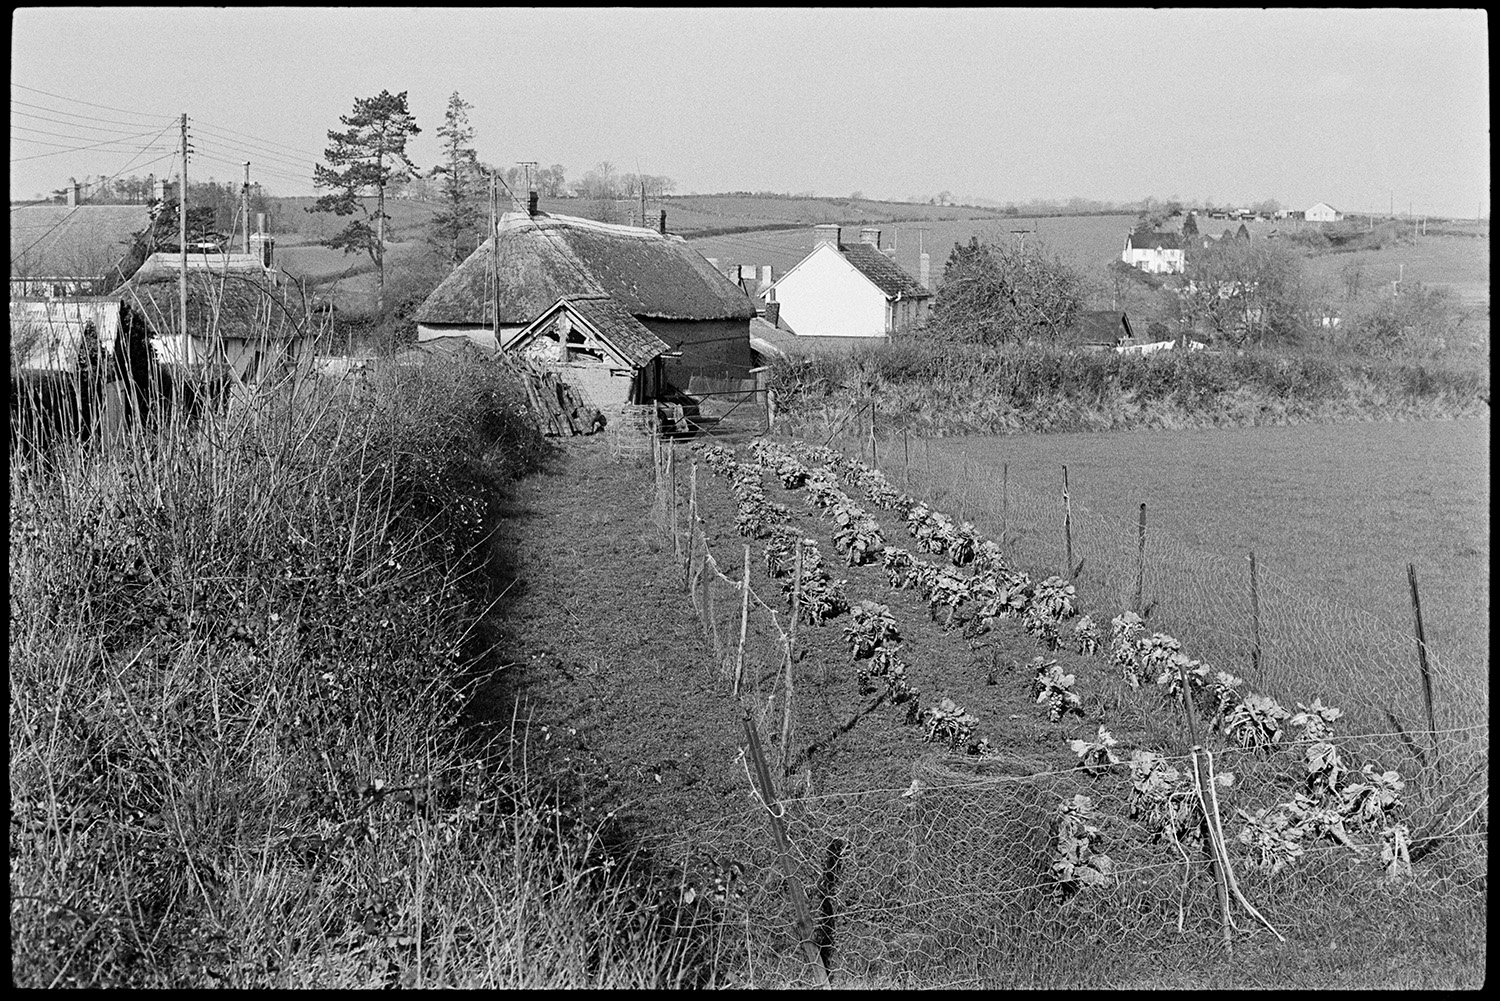 Cob and thatch cottages. 
[A vegetable patch, possibly potatoes, inside a chicken wire fence at the edge of a field in Monkokehampton. Cob and thatch cottages can be seen in the background.]